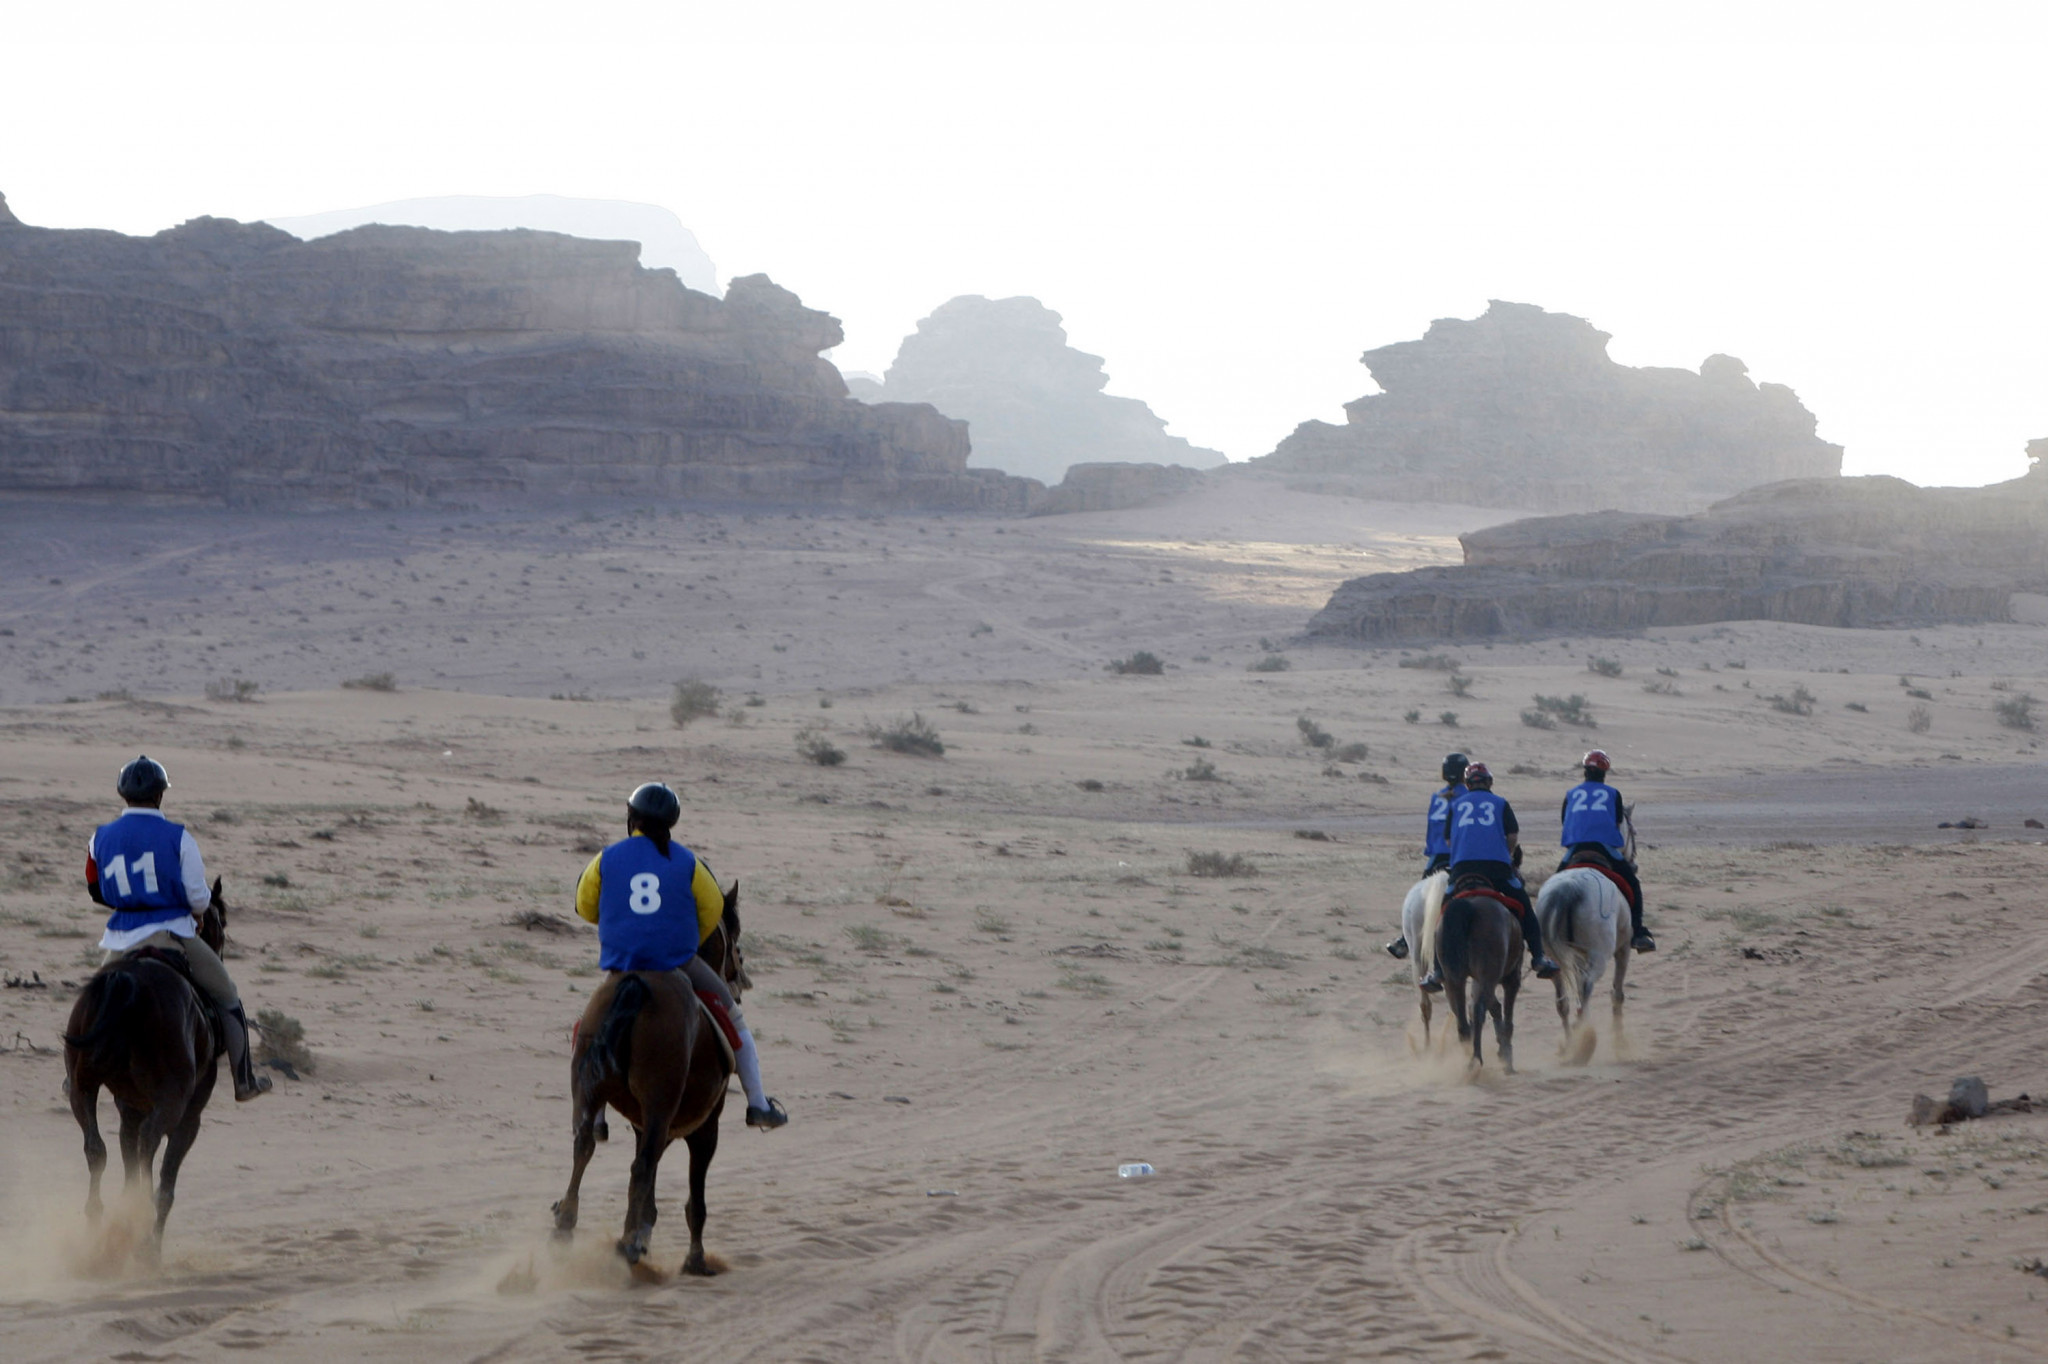 The banned substance was found at an event in Wadi Rum in Jordan ©Getty Images